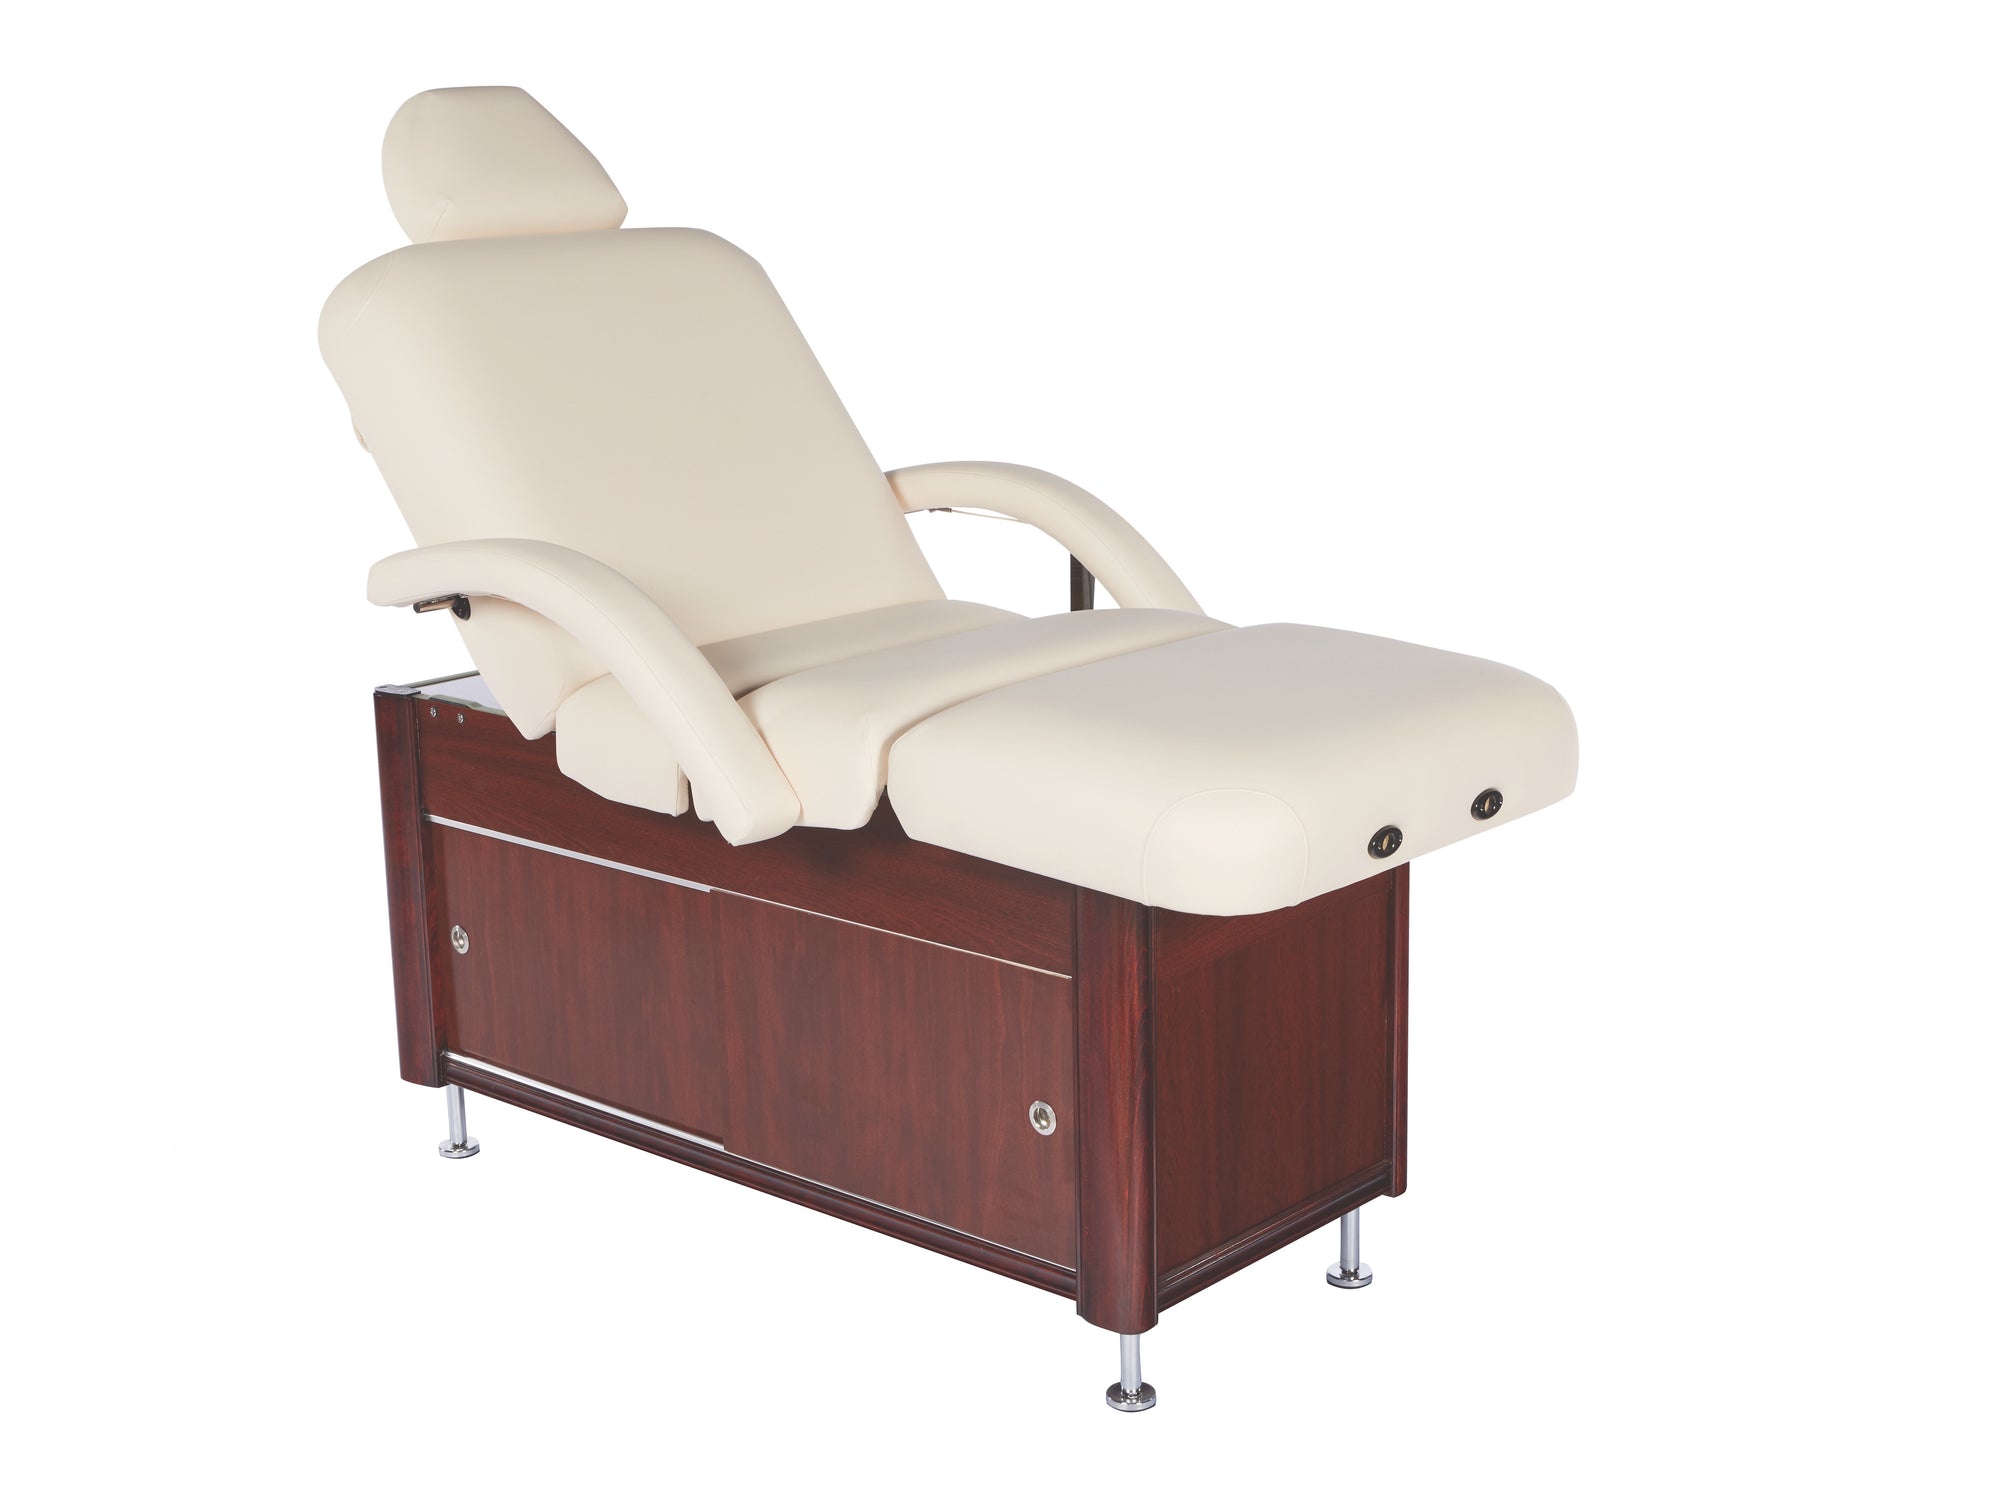 Signature Series by Custom Craftworks - E100 Deluxe Electric Spa Table - Superb Massage Tables